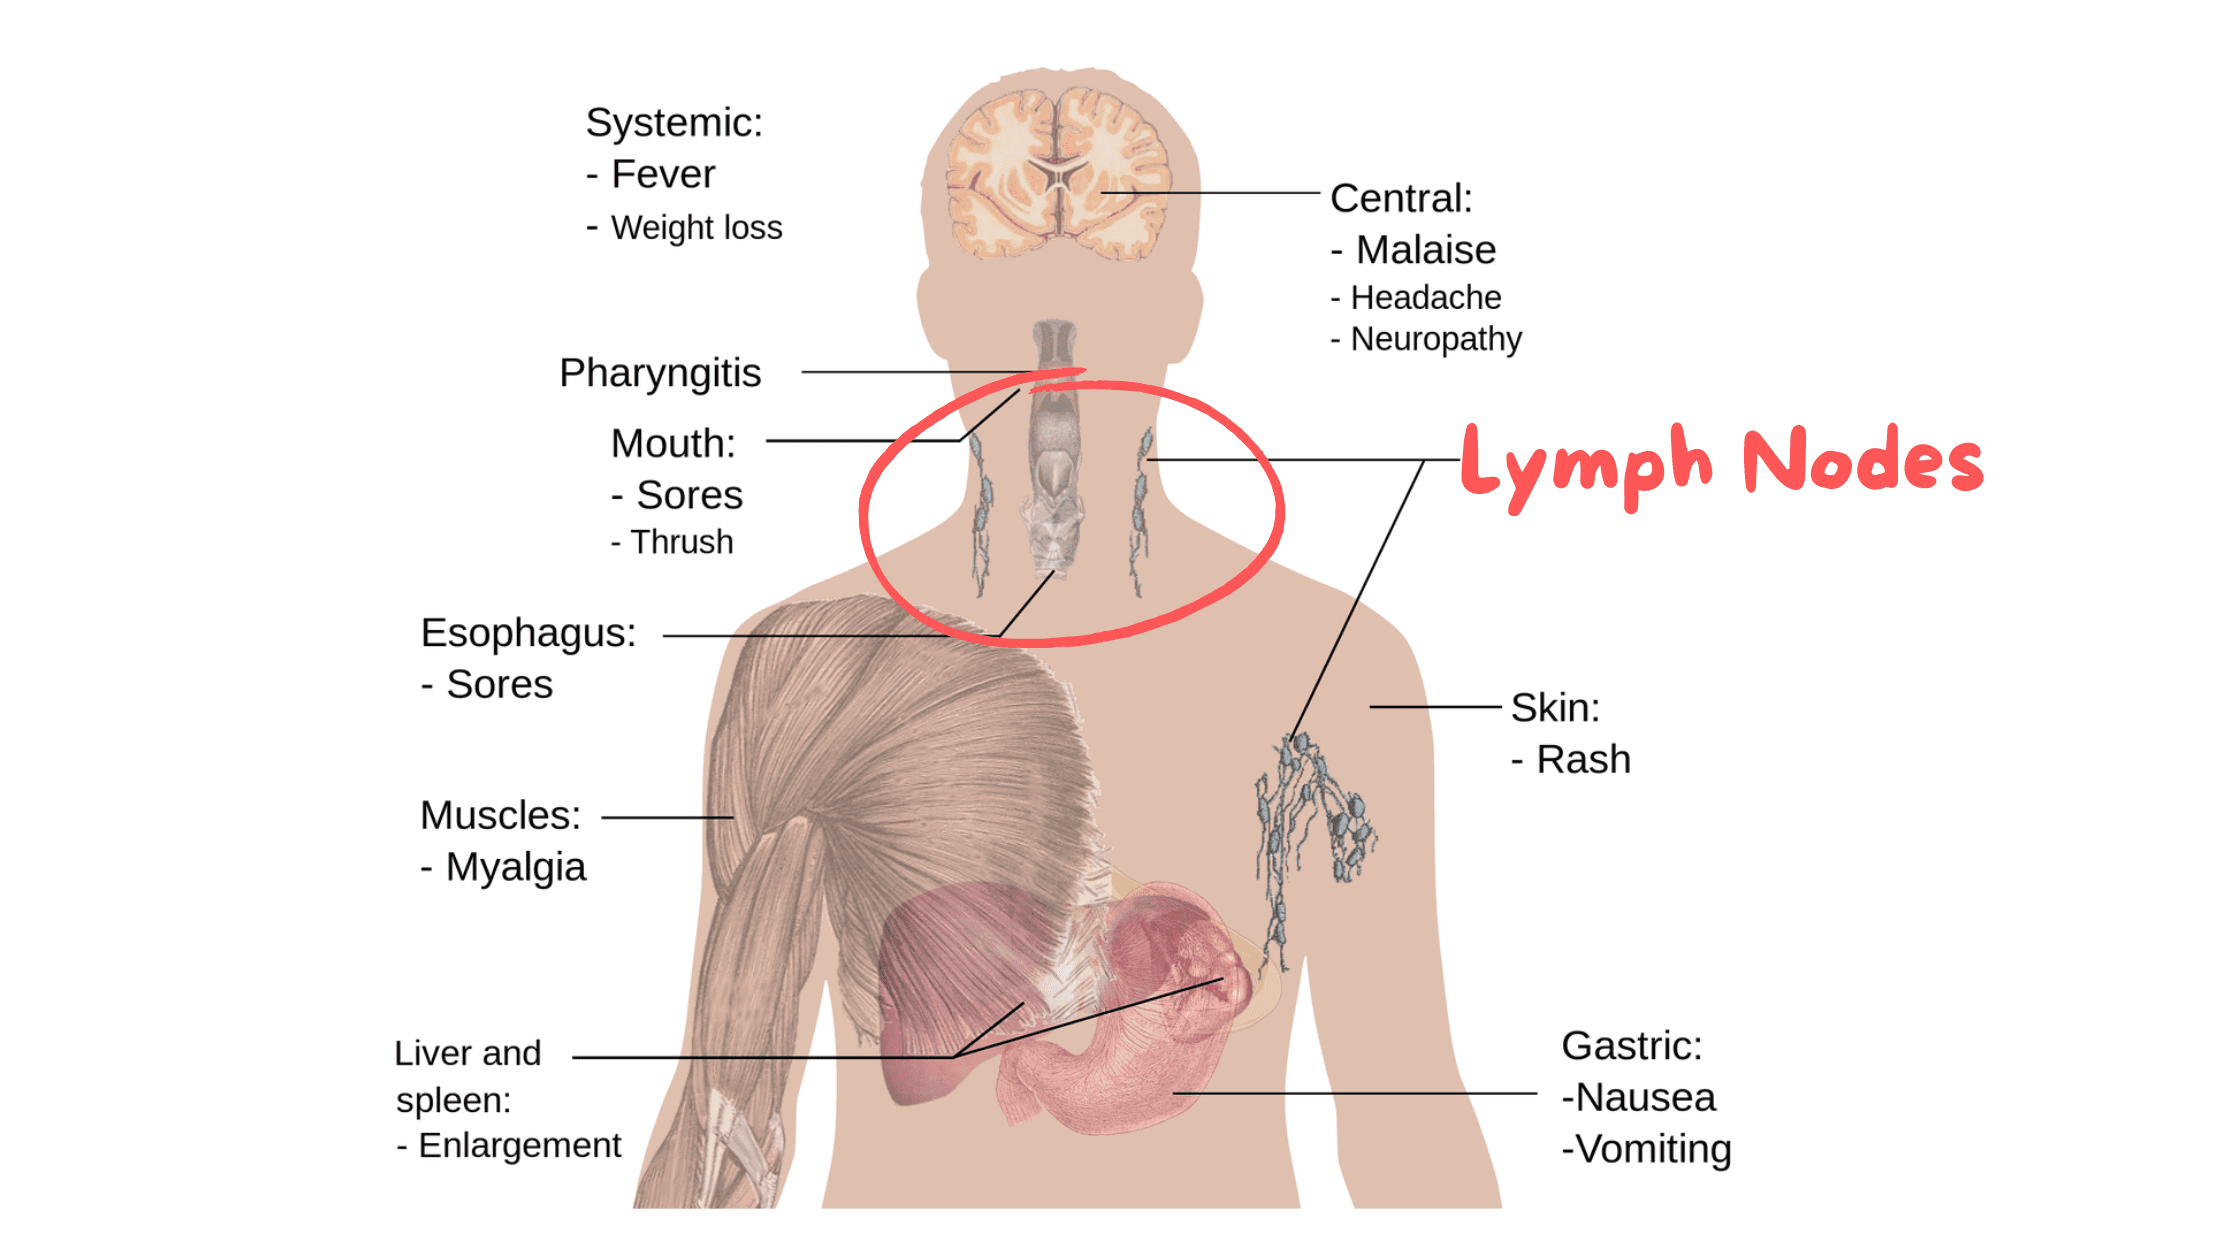 lymph nodes of the neck